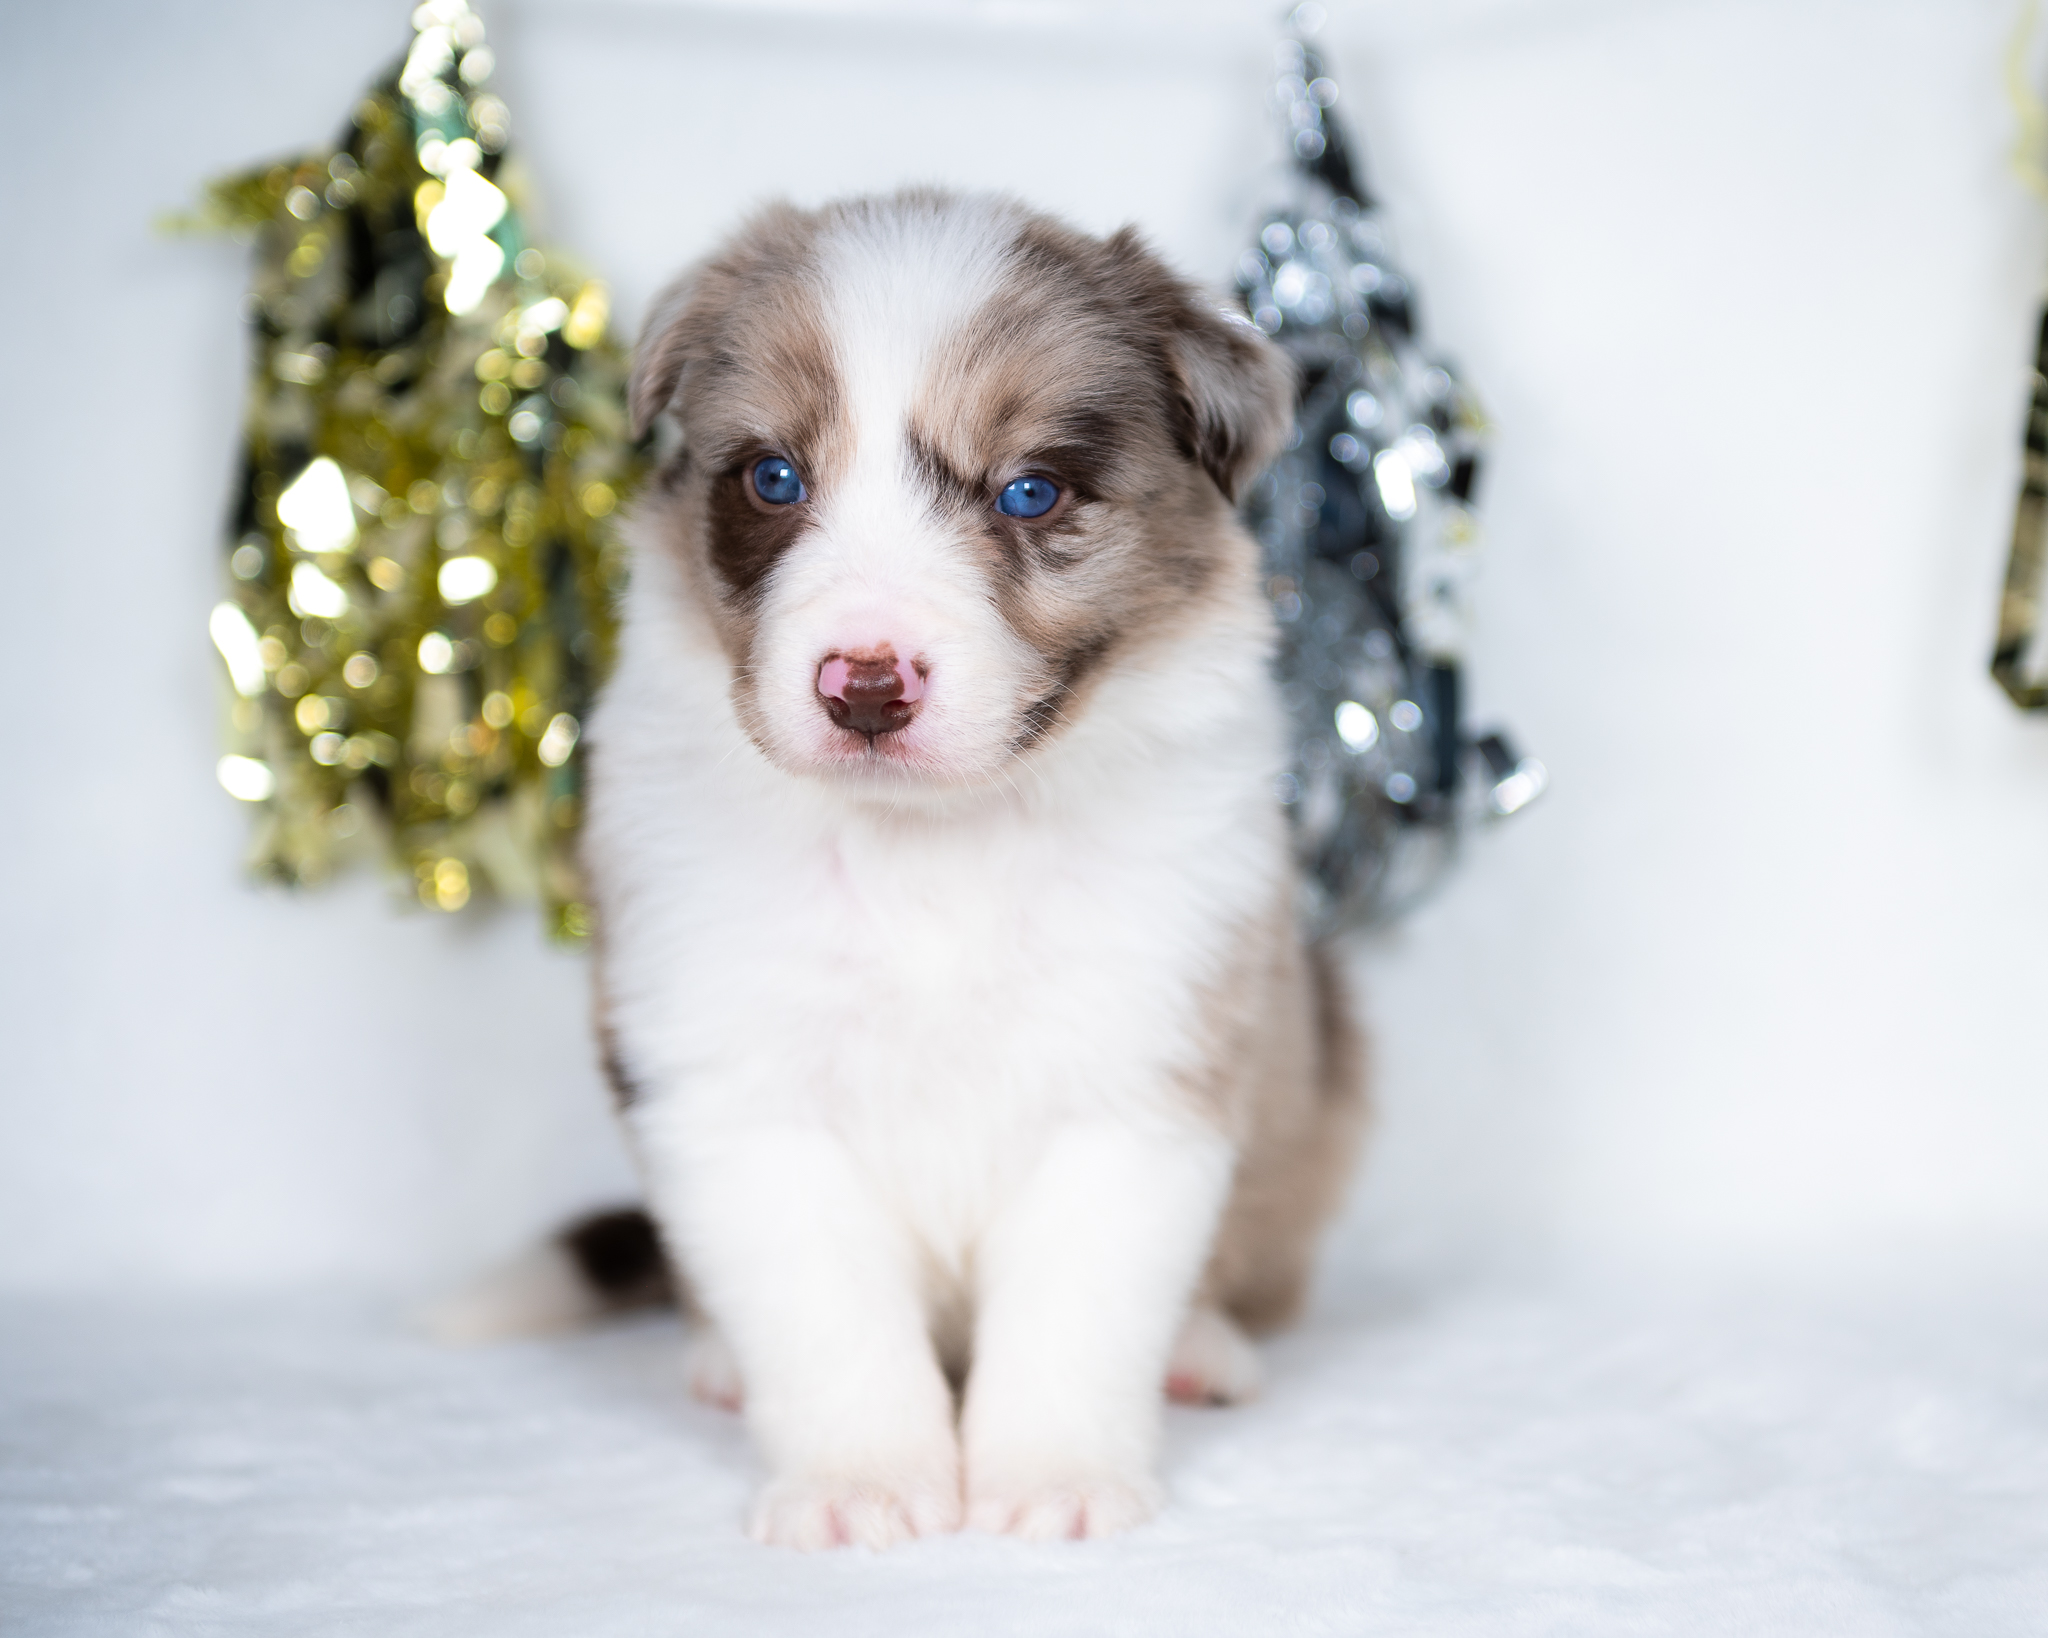 Red merle Border Collie for sale in Florida.